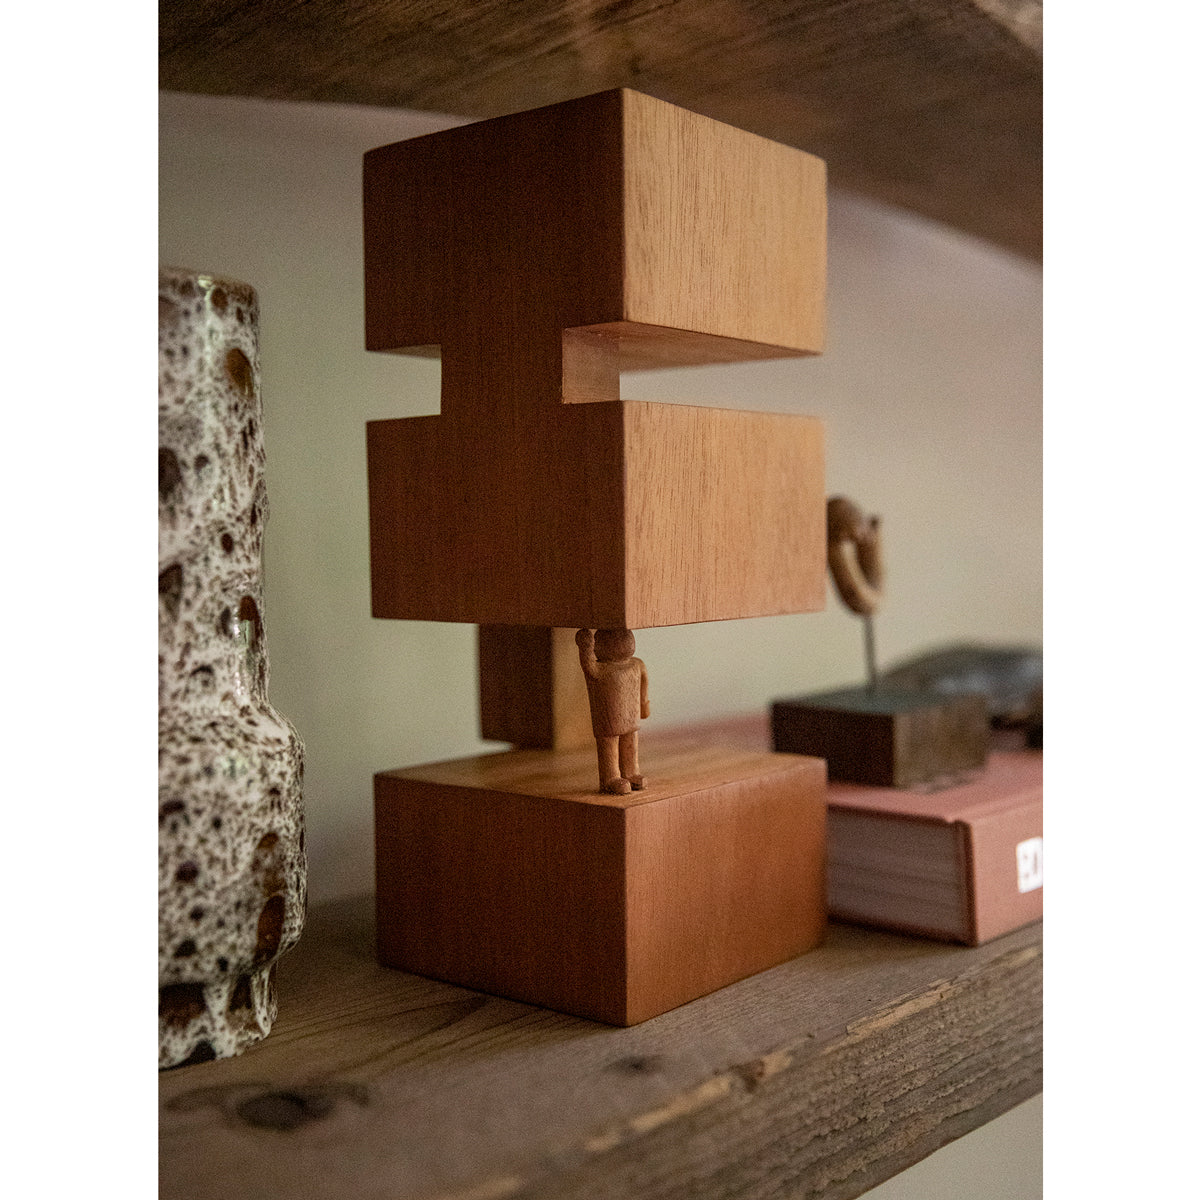 HKLiving Hk Objects: Empowered Wooden Sculpture 